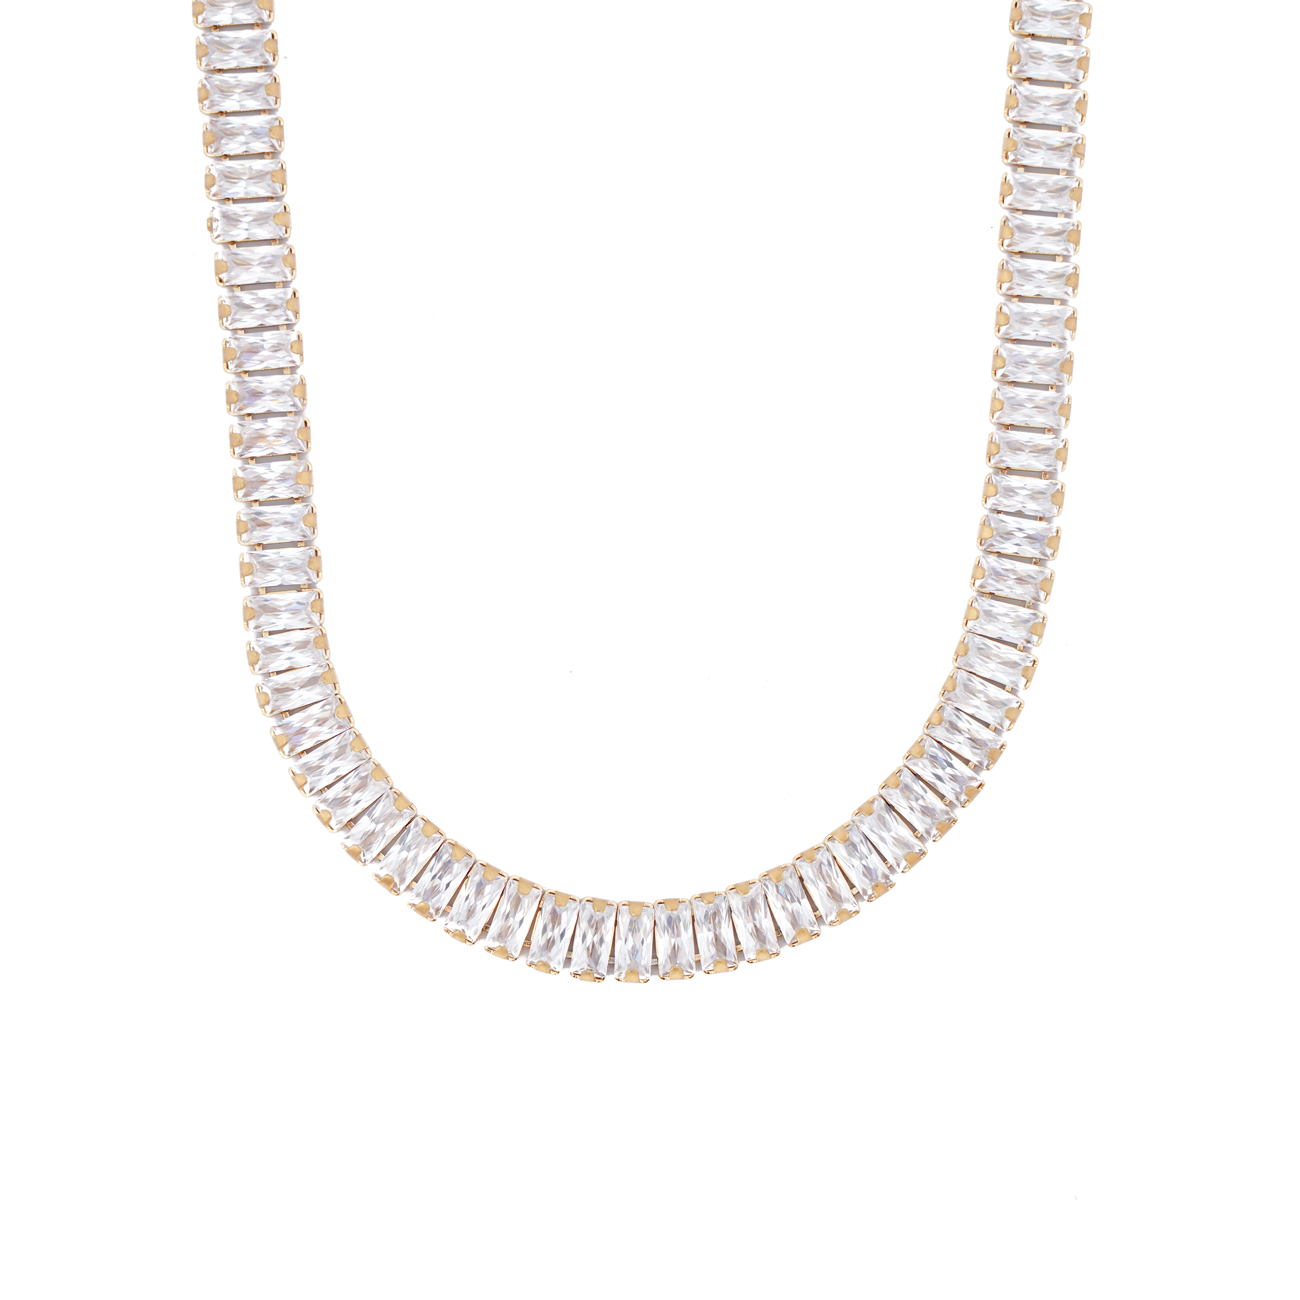 Haley necklace - Clear